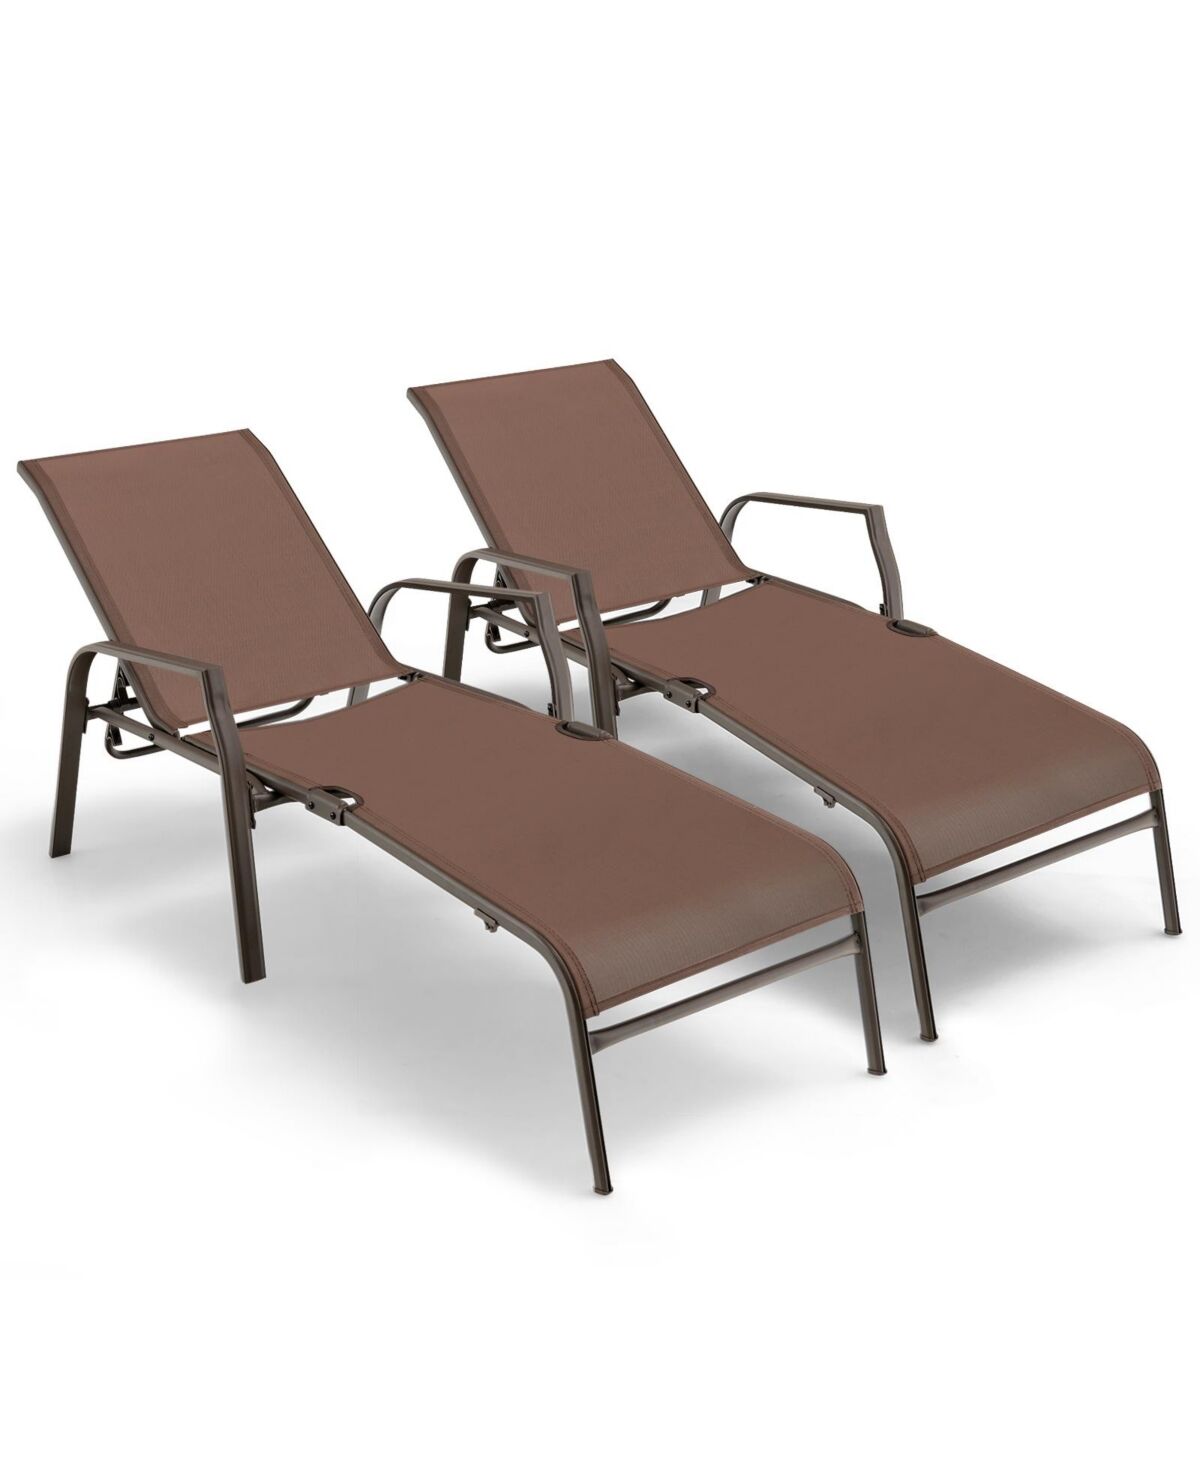 Sugift 2 Pieces Patio Folding Chaise Lounge Chair Set with Adjustable Back - Brown